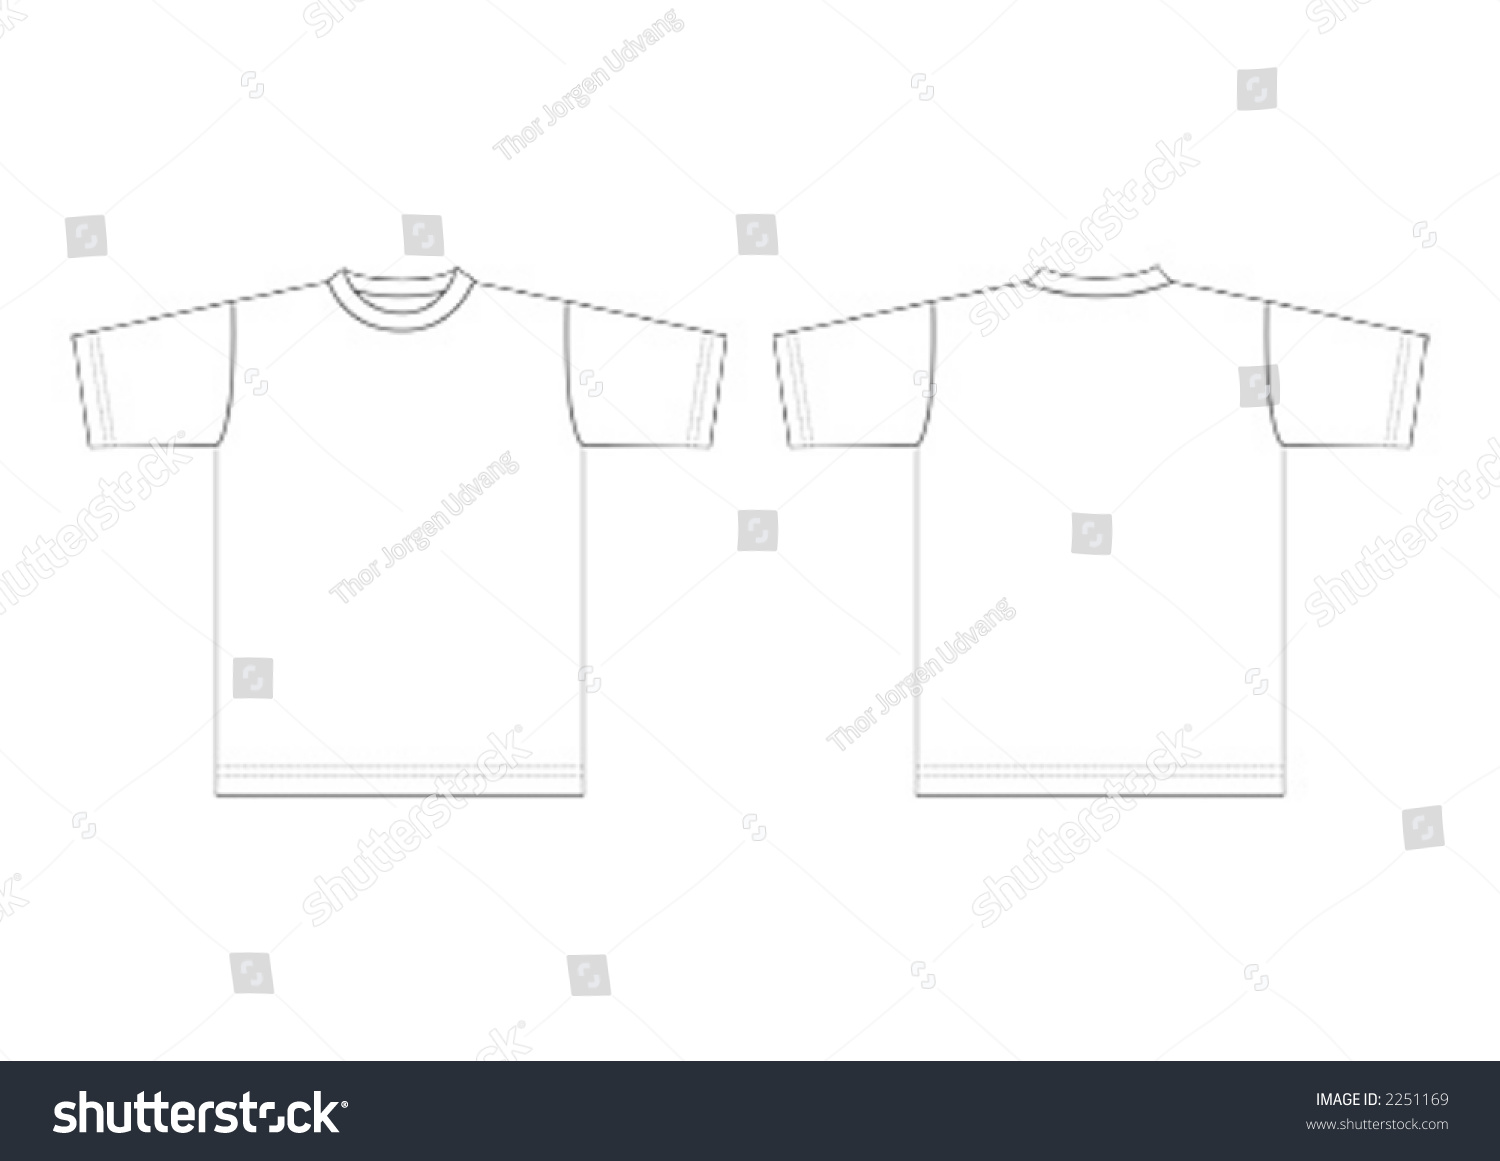 Outline Of Plain, White T-Shirt For Use As Template. Stock Vector ...